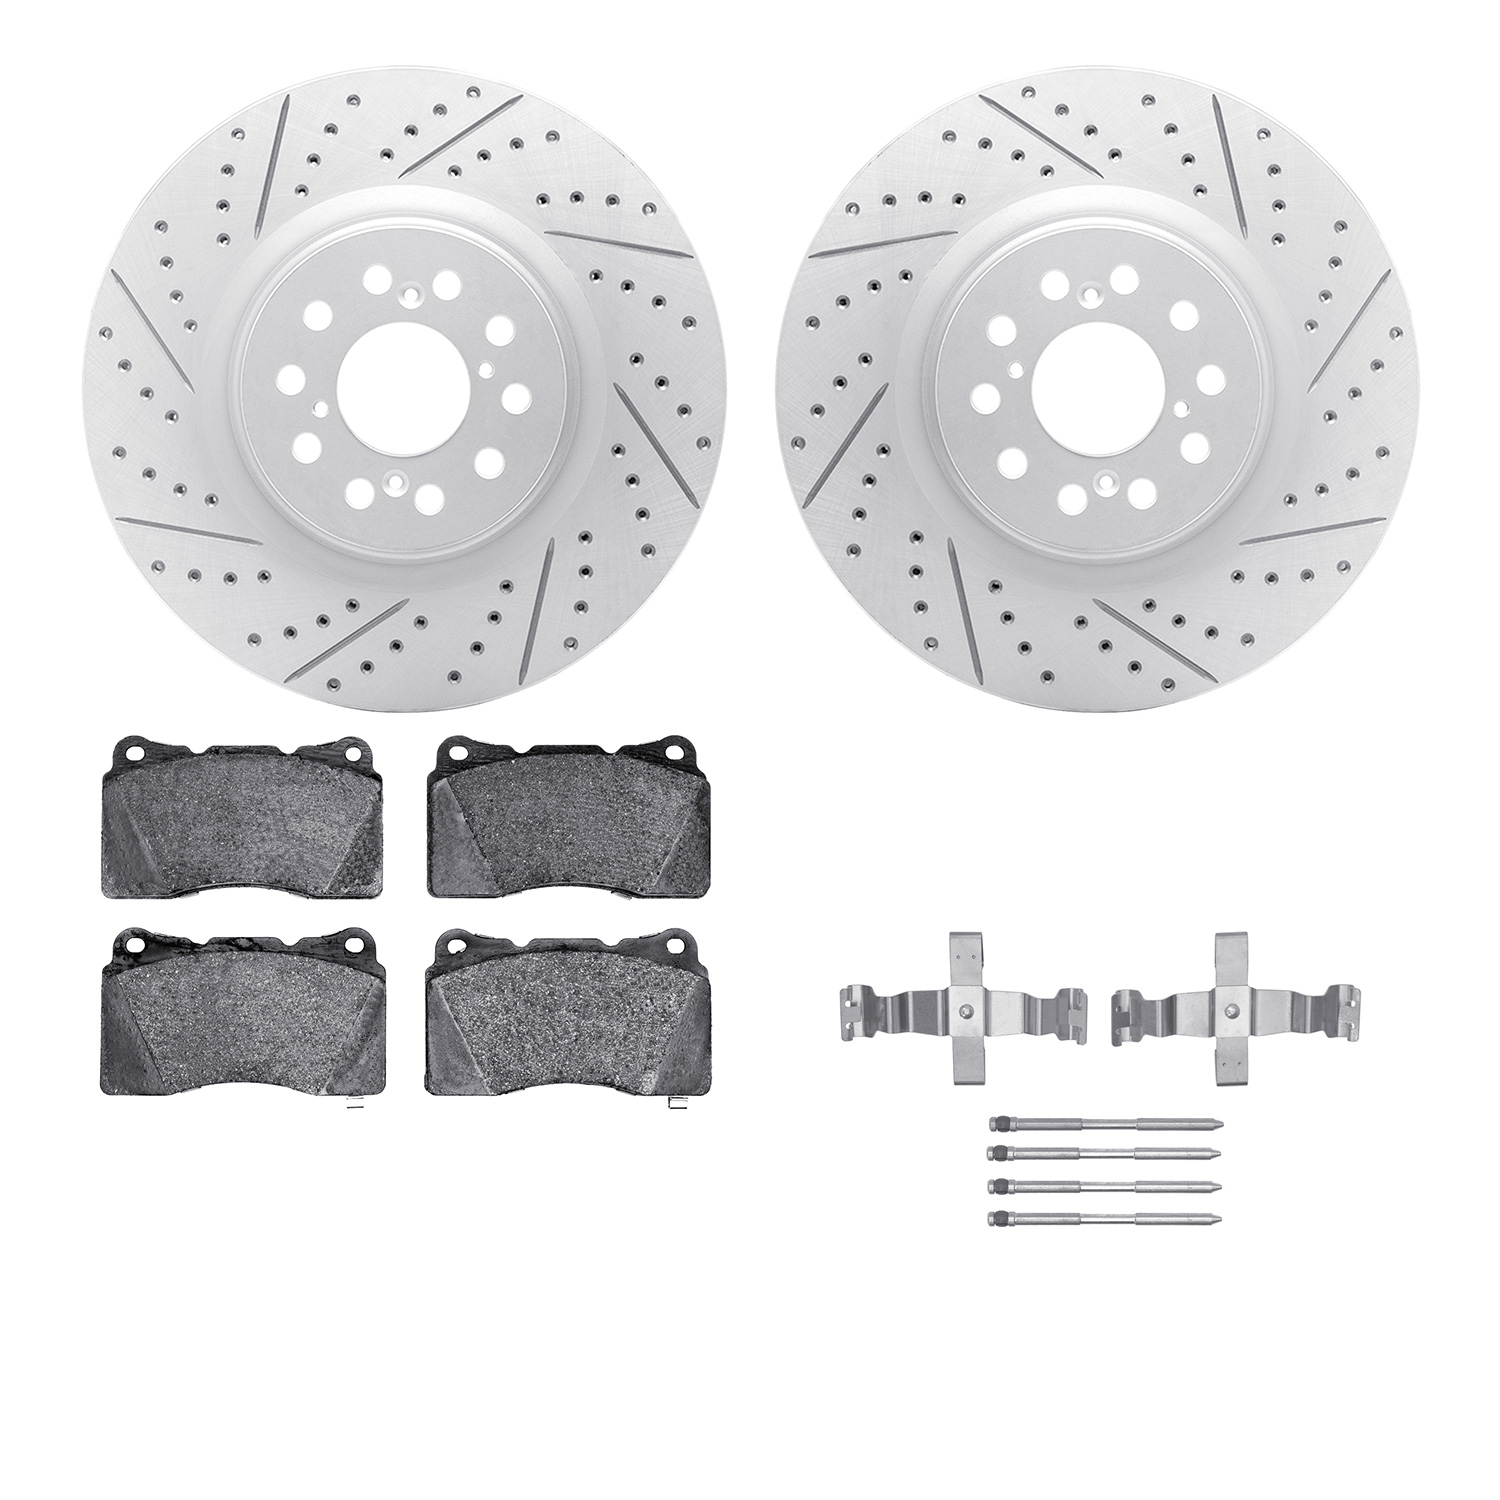 2512-59098 Geoperformance Drilled/Slotted Rotors w/5000 Advanced Brake Pads Kit & Hardware, 2017-2019 Acura/Honda, Position: Fro